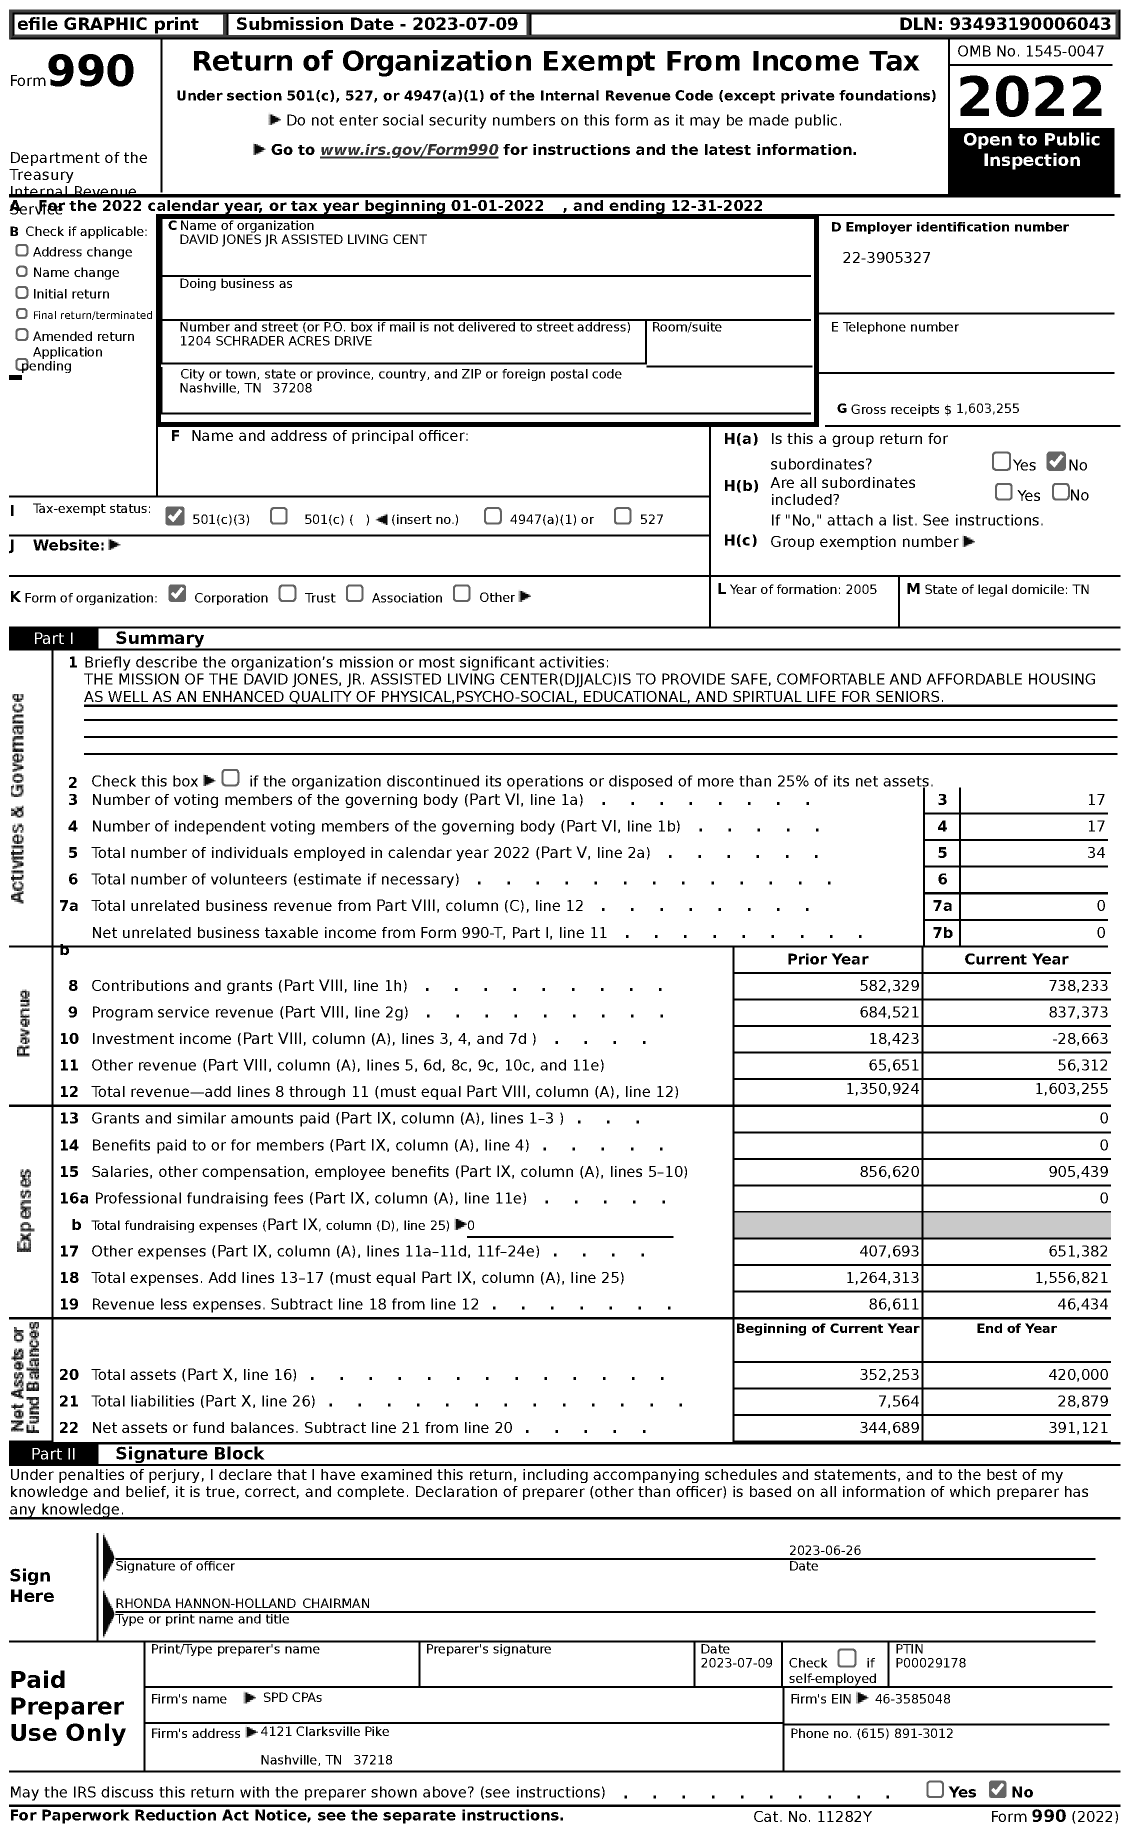 Image of first page of 2022 Form 990 for David Jones JR Assisted Living Center